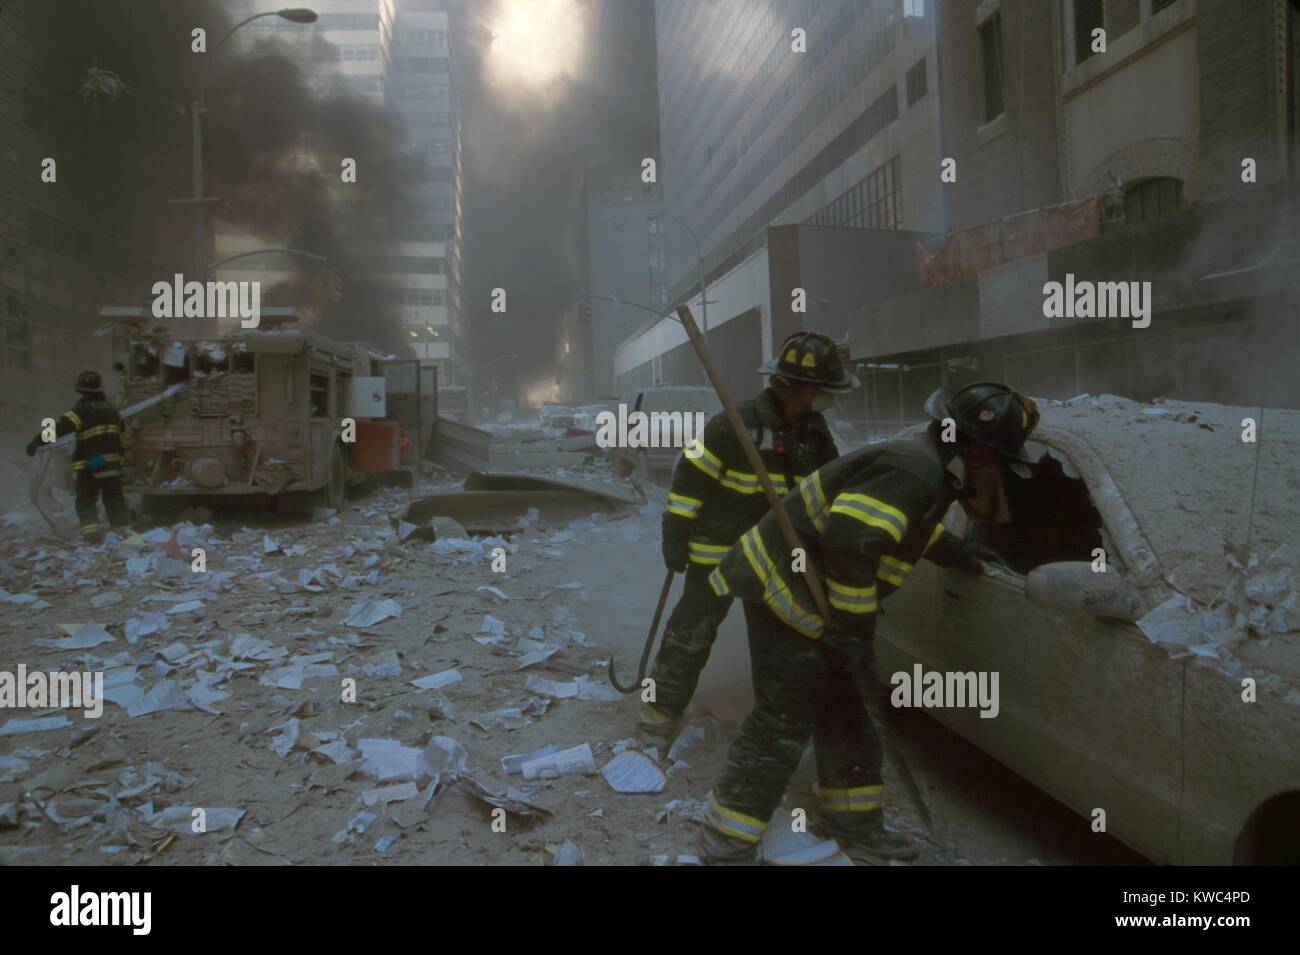 NYC firemen checking a car on Barclay Street after the 9-11 terrorist attack on World Trade Center. In the mid-ground fireman pulls a water hose from fire truck. View is toward West Broadway and includes WTC 7, on right, clad in red exterior masonry. WTC 7 collapsed at 5:20 PM on Sept. 11, 2001, due to fires ignited by debris from the North Tower (WTC 1) destruction earlier in the day. (BSLOC 2015 2 53) Stock Photo